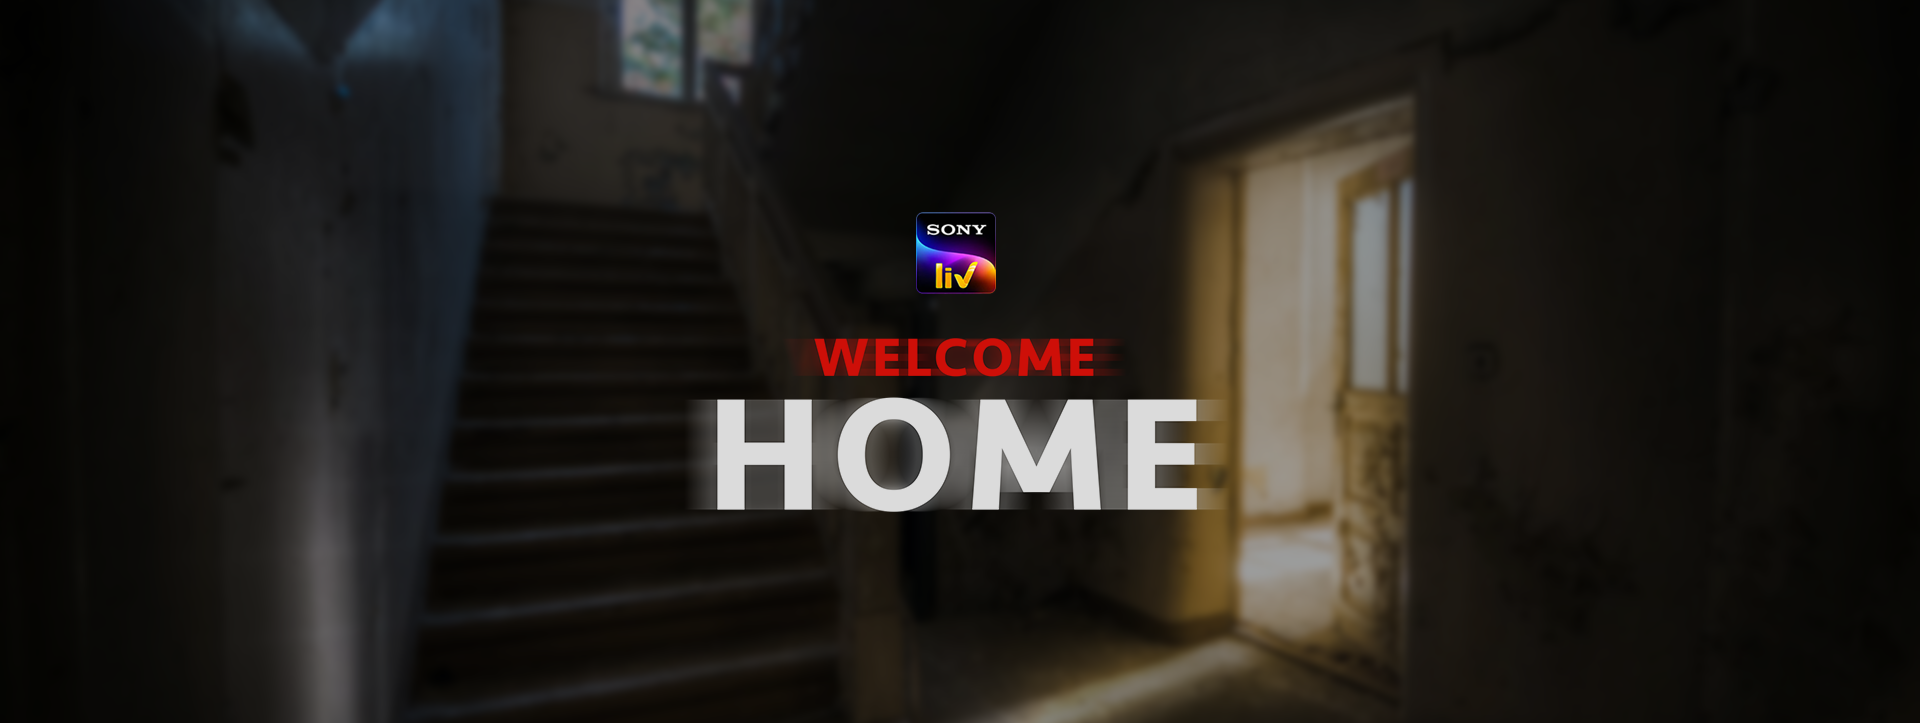 Welcome Home 